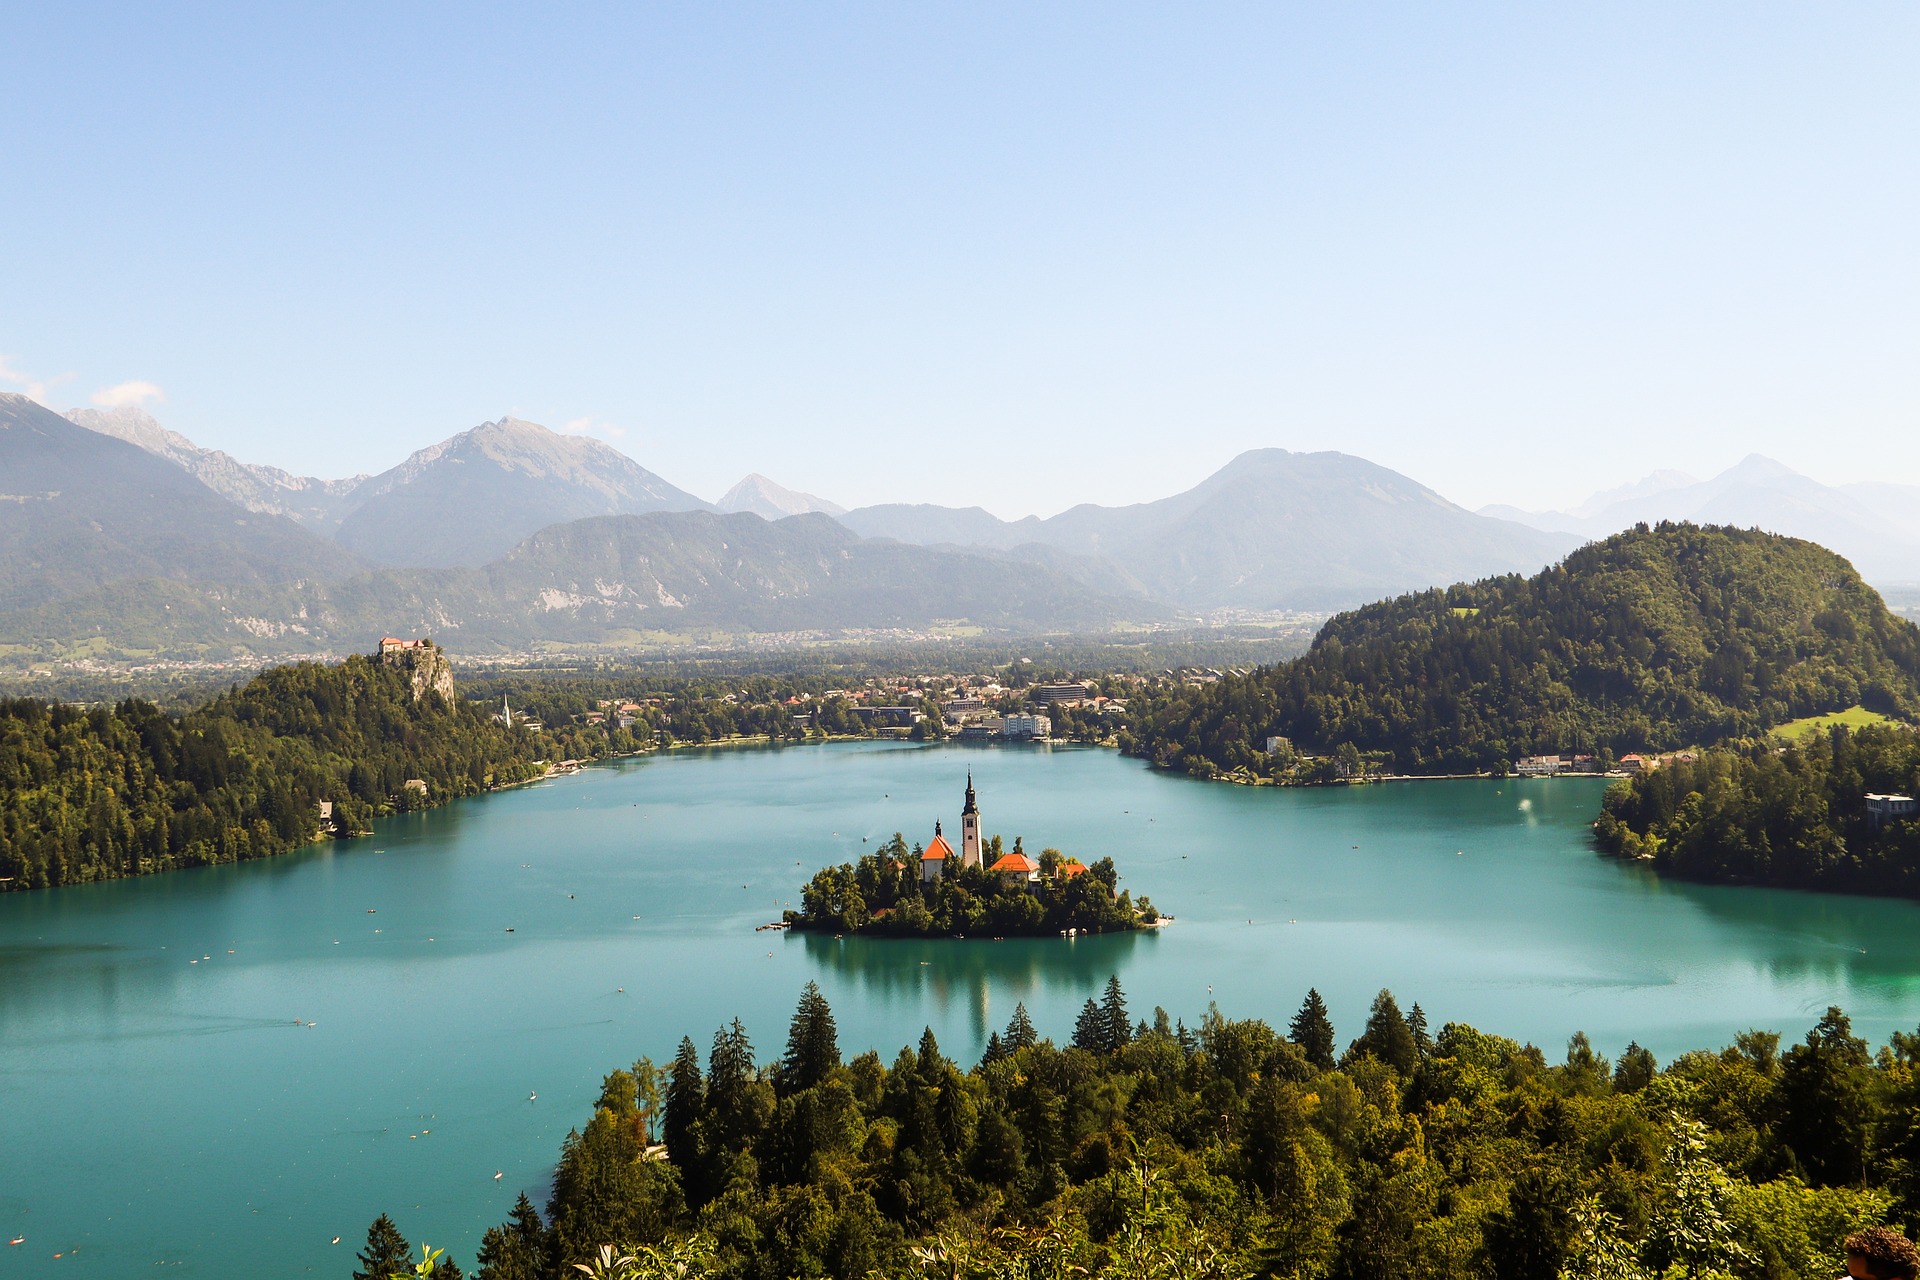 Bled, GreenValleyPictures, Pixabay